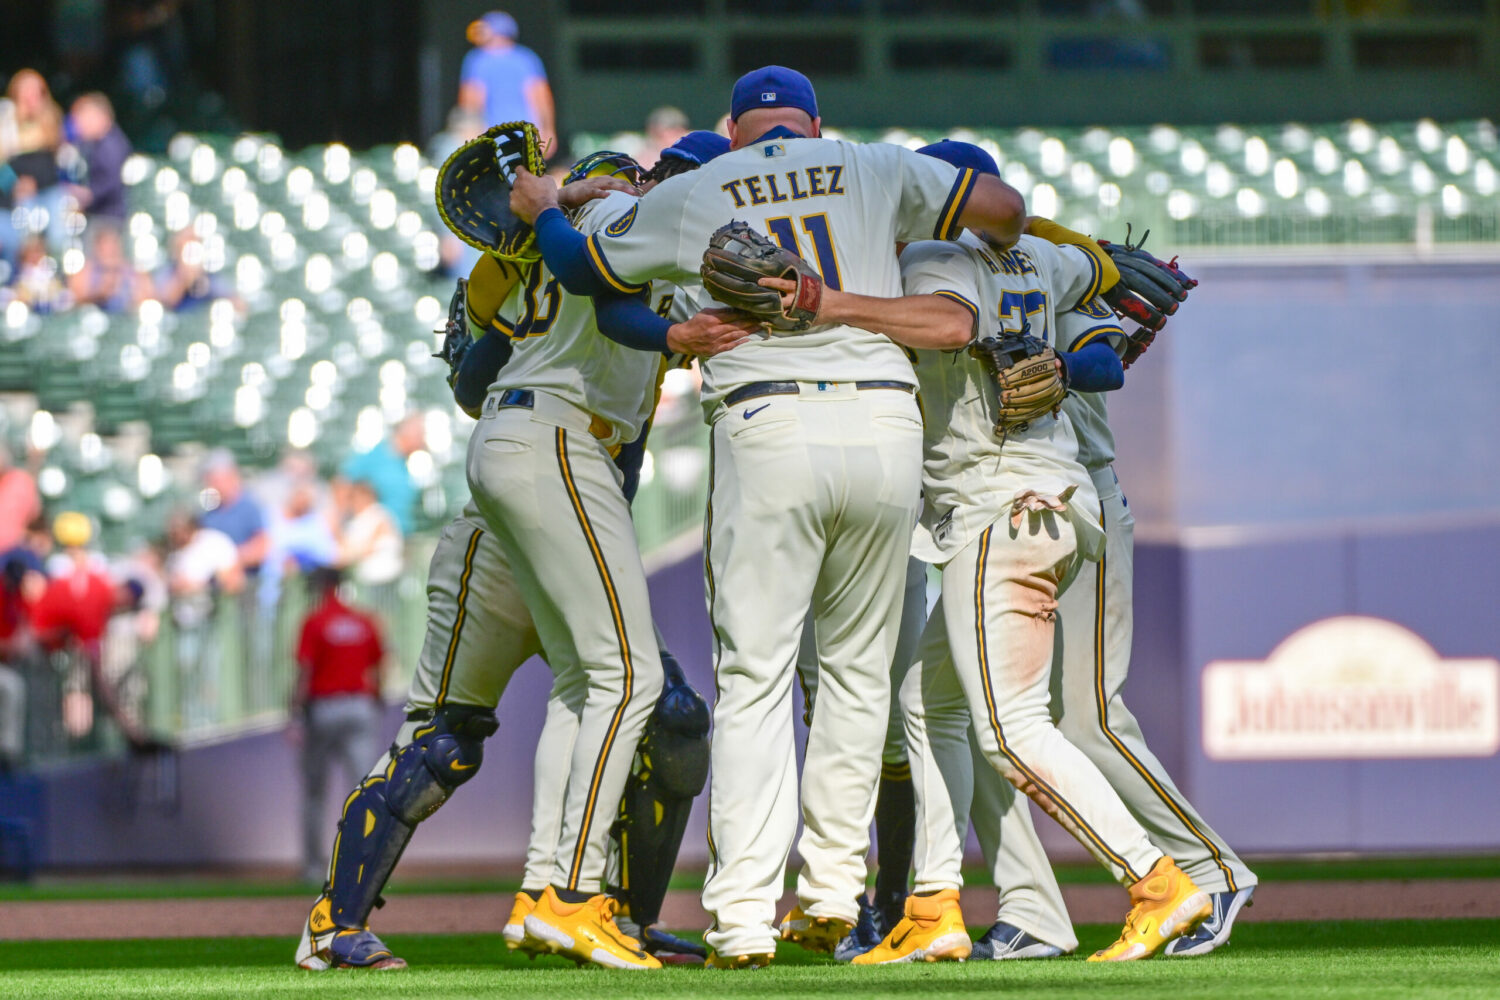 Series Preview: St. Louis Cardinals @ Milwaukee Brewers - Brew Crew Ball